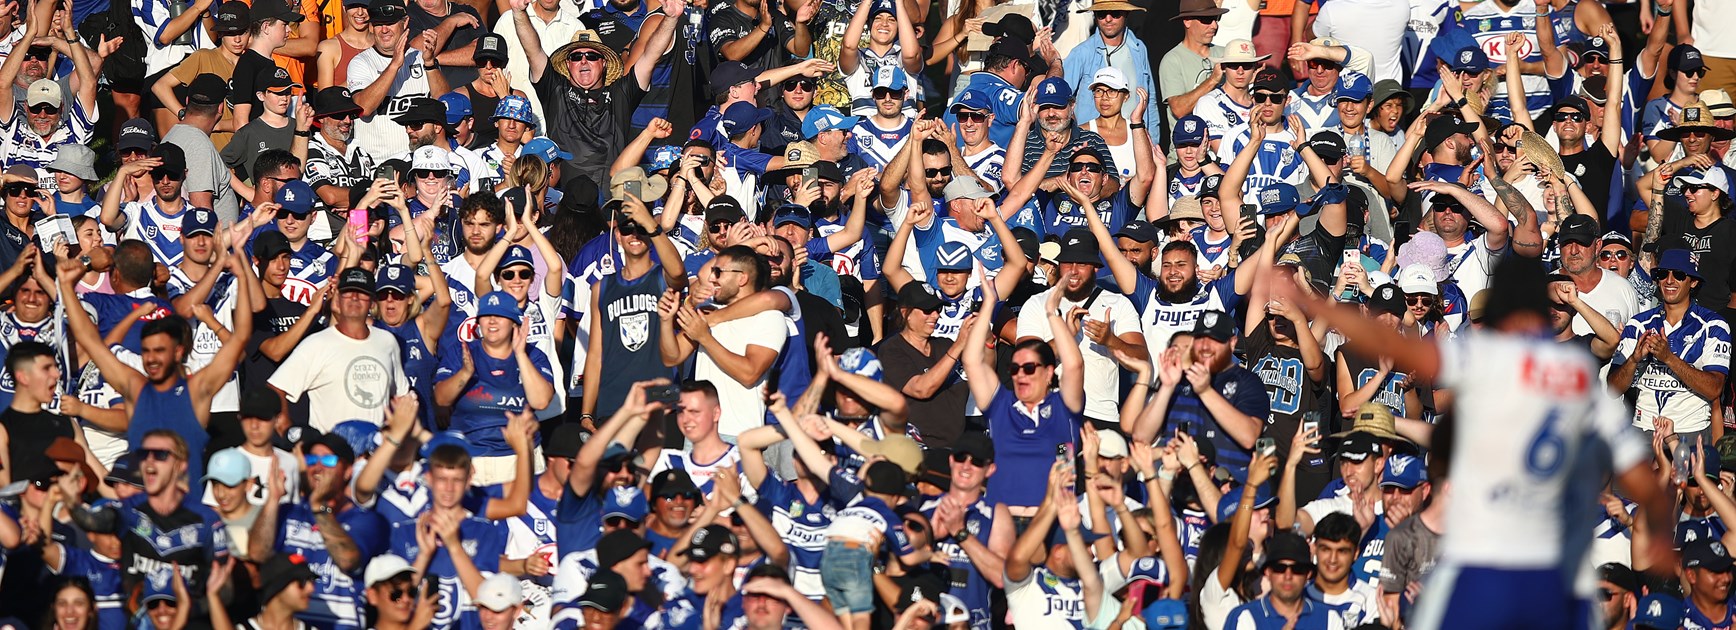 Bulldogs v Broncos Belmore Double-Header Officially a Sell-Out